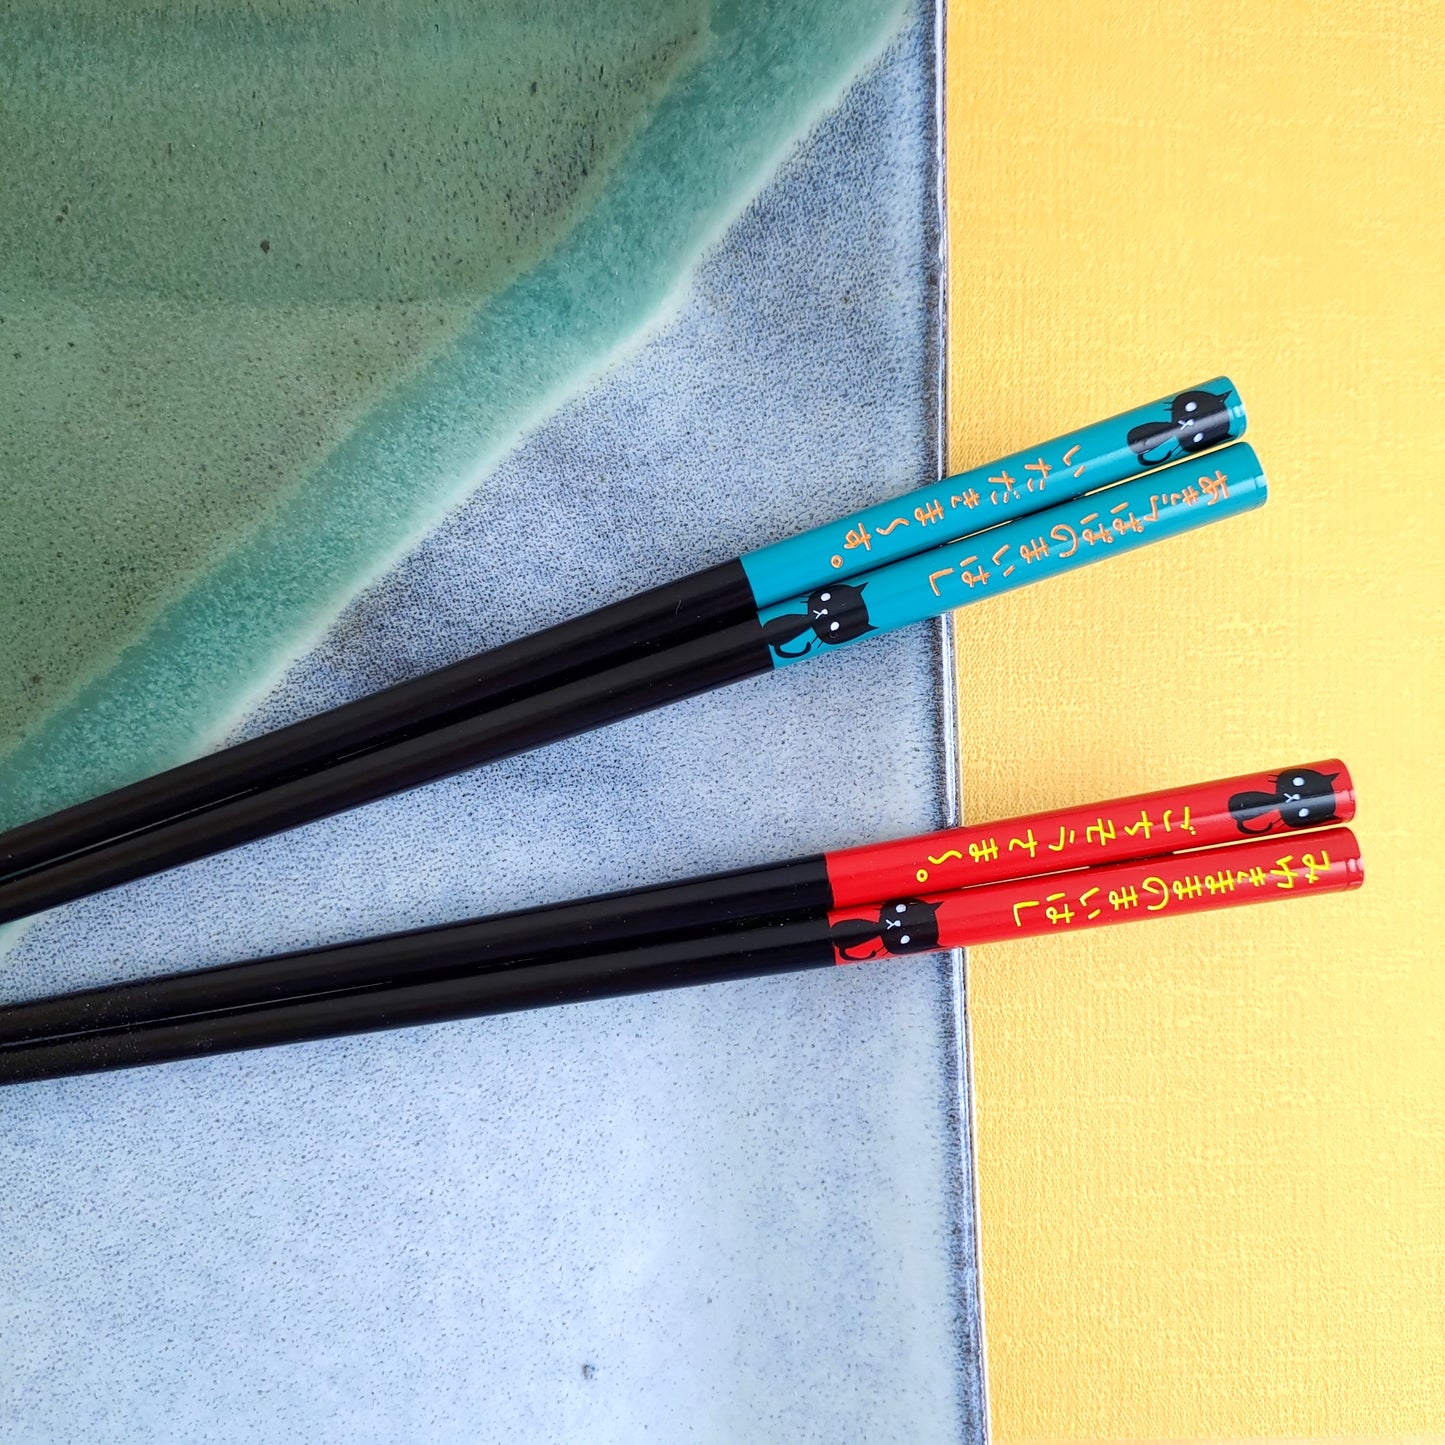 Black cat Japanese chopsticks blue red - DOUBLE PAIR WITH ENGRAVED WOODEN BOX SET